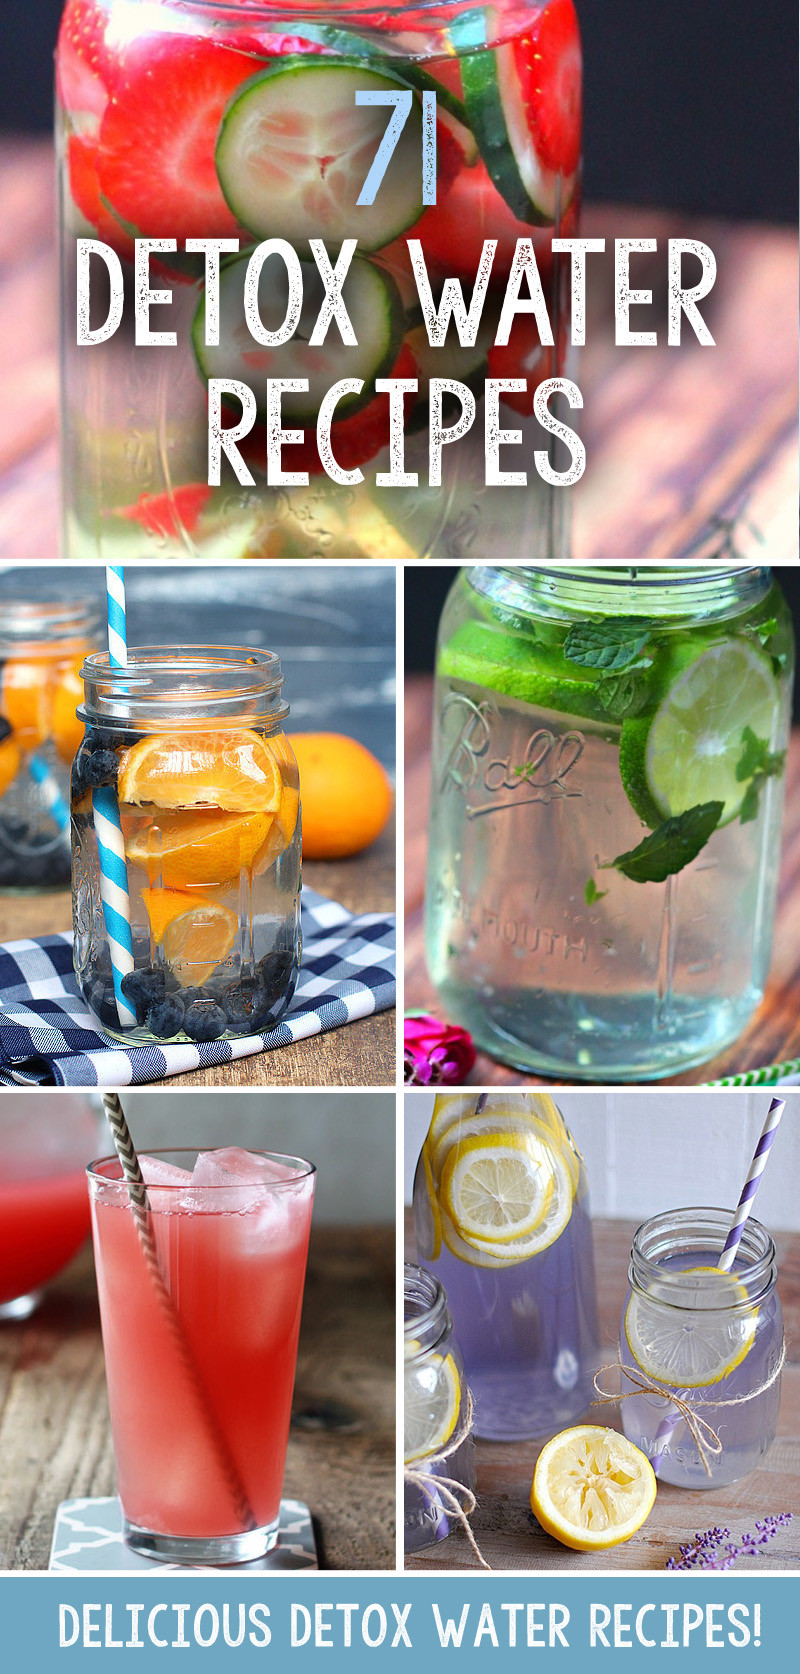 Quick Weight Loss Detox
 71 Delicious Detox Water Recipes To Help You Lose Weight Fast